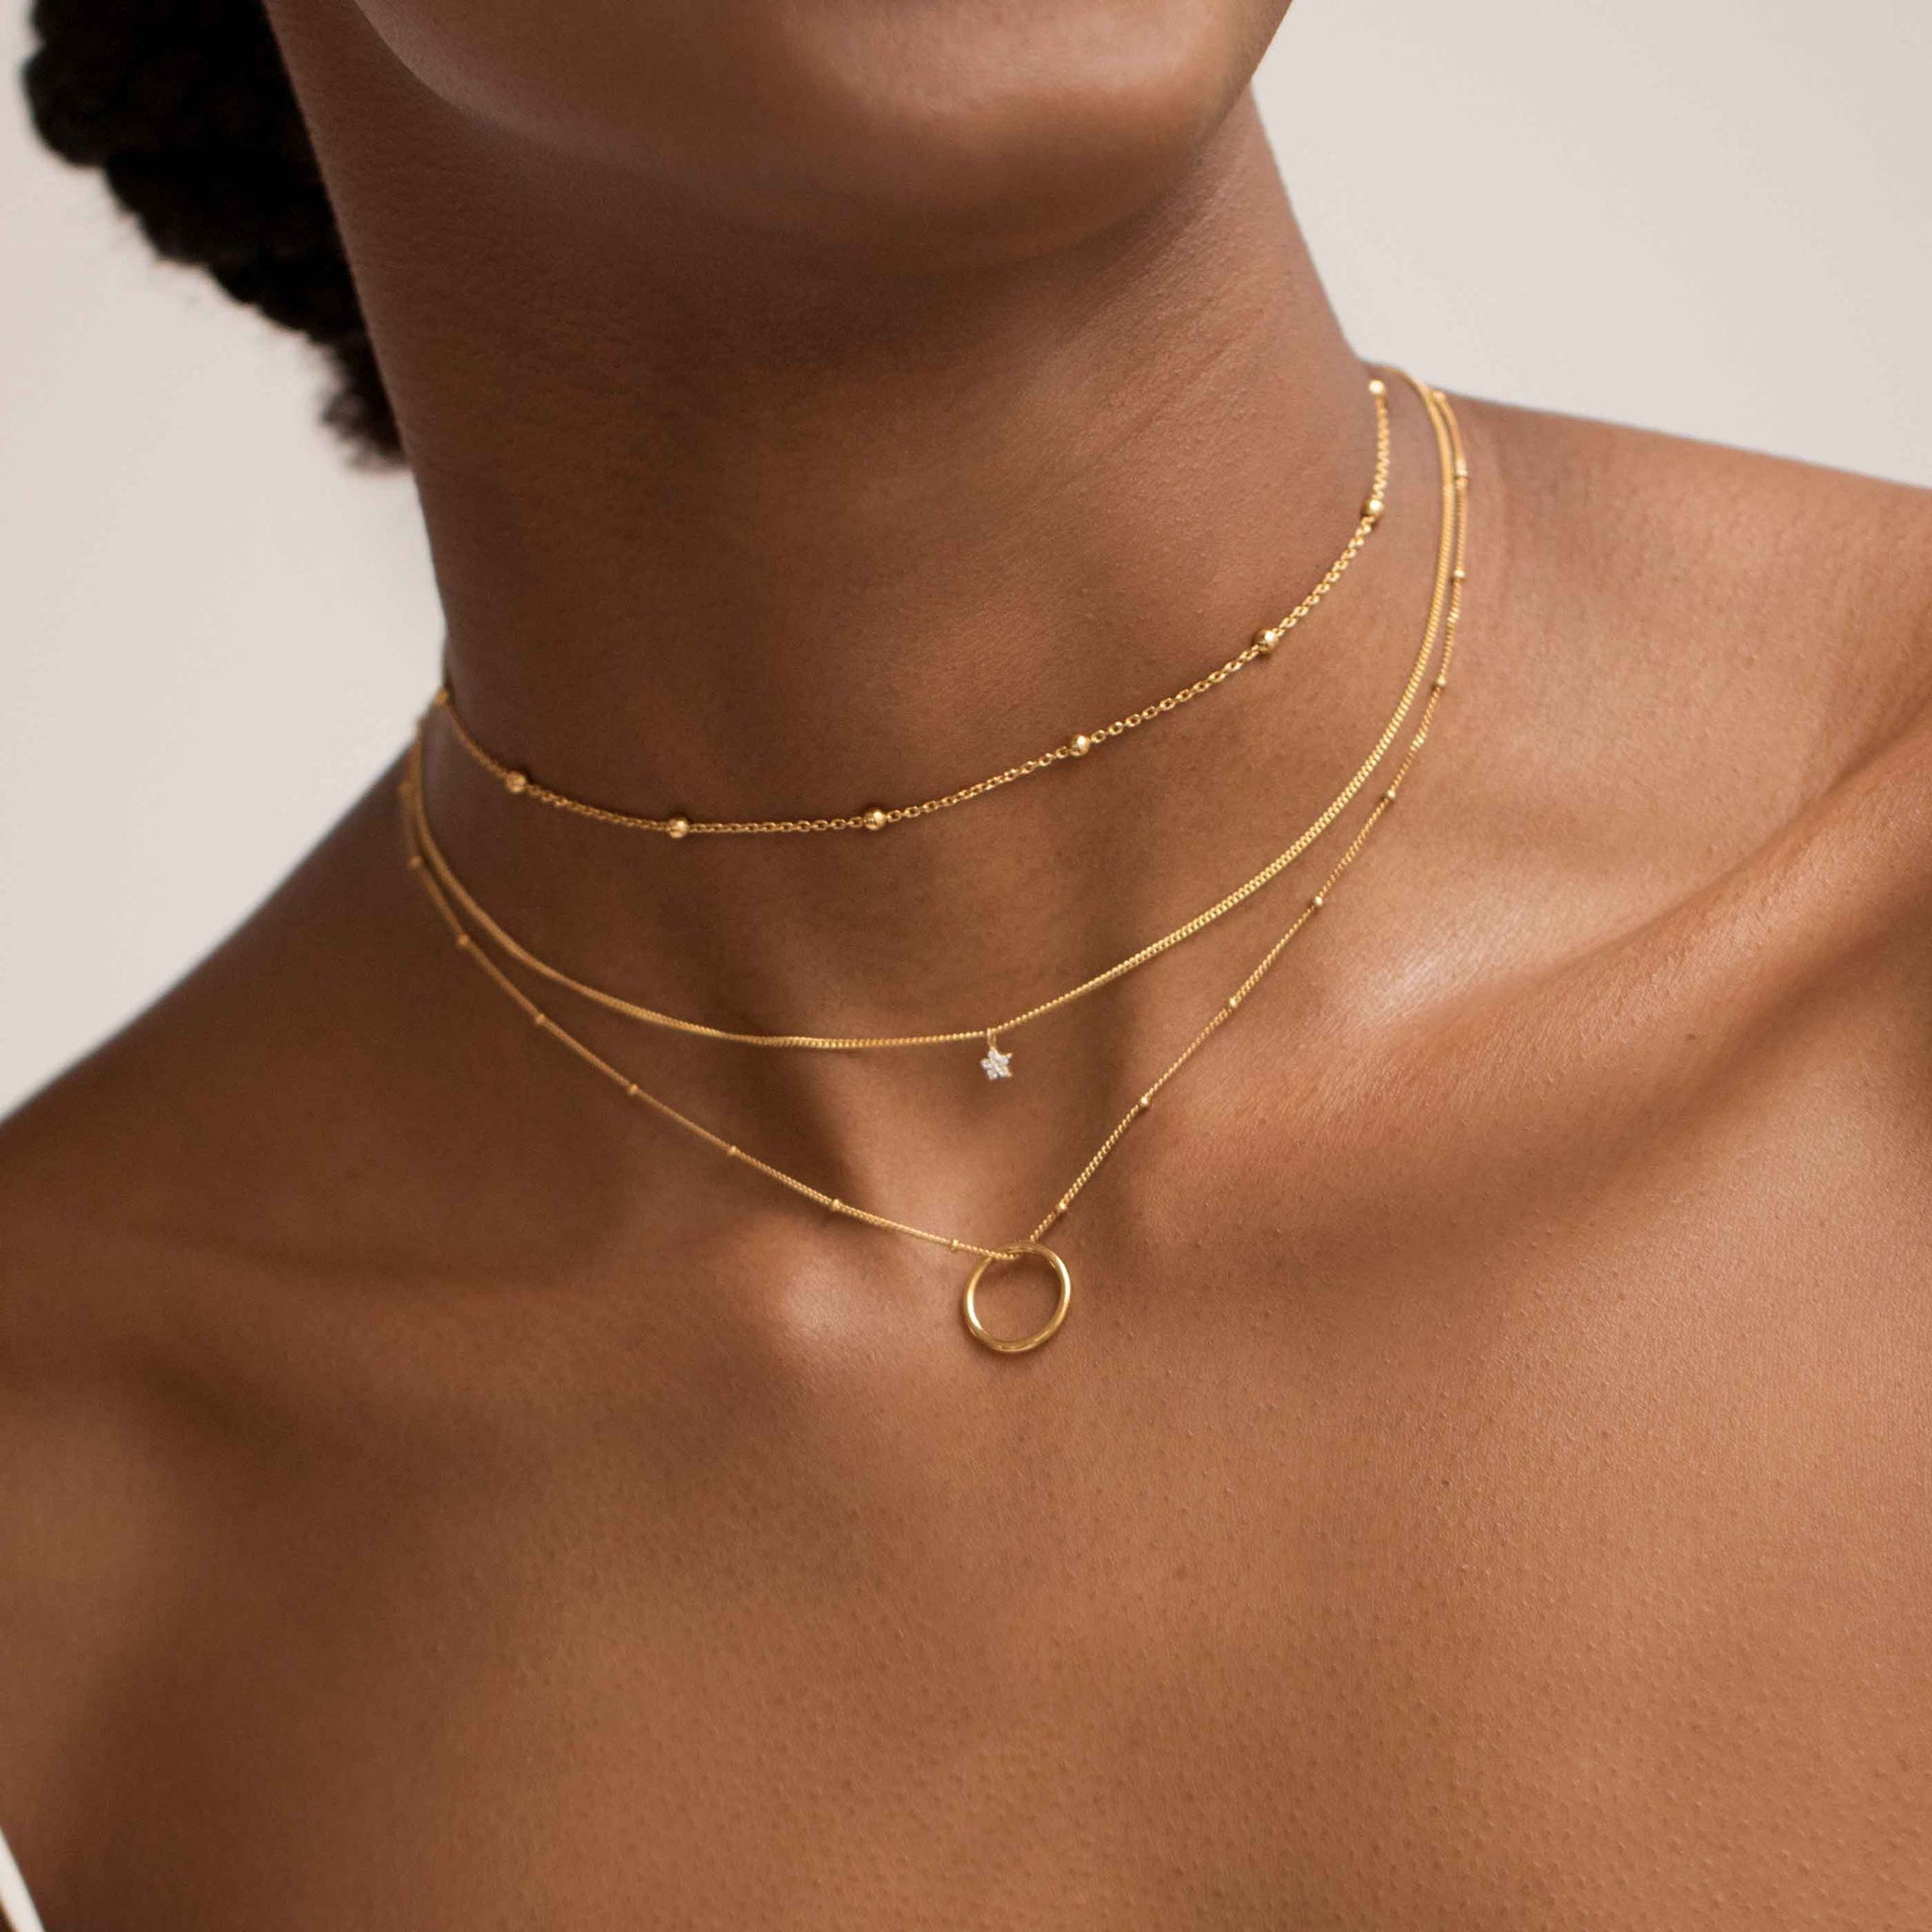 Basic Large Beaded Choker in Gold worn with pendant necklaces